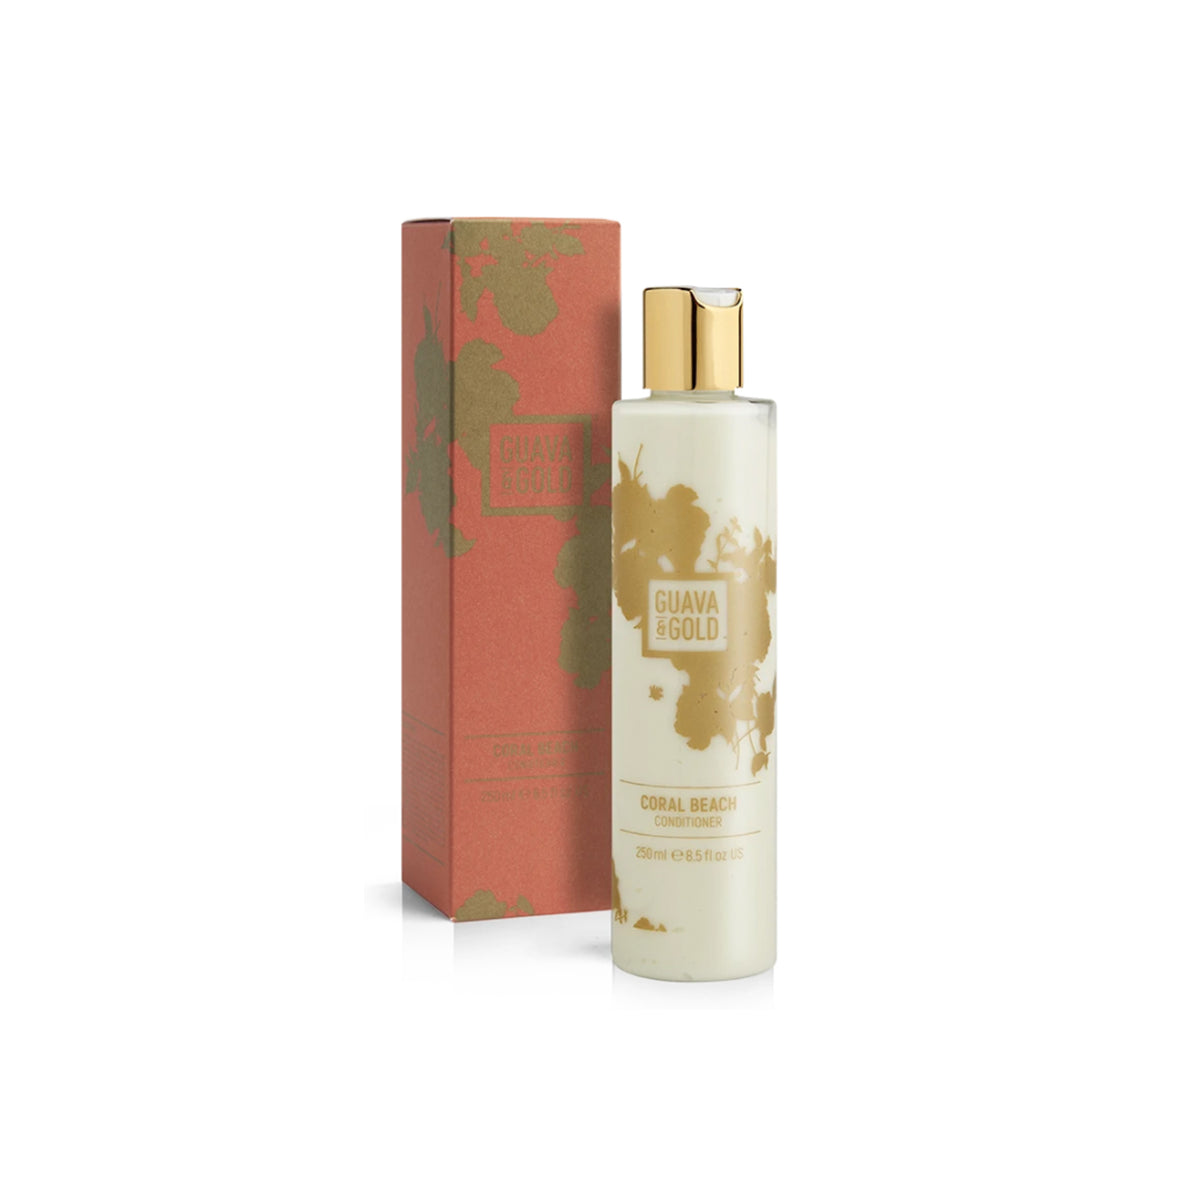 coral and gold printed bottle and box of conditioner by Guava and Gold